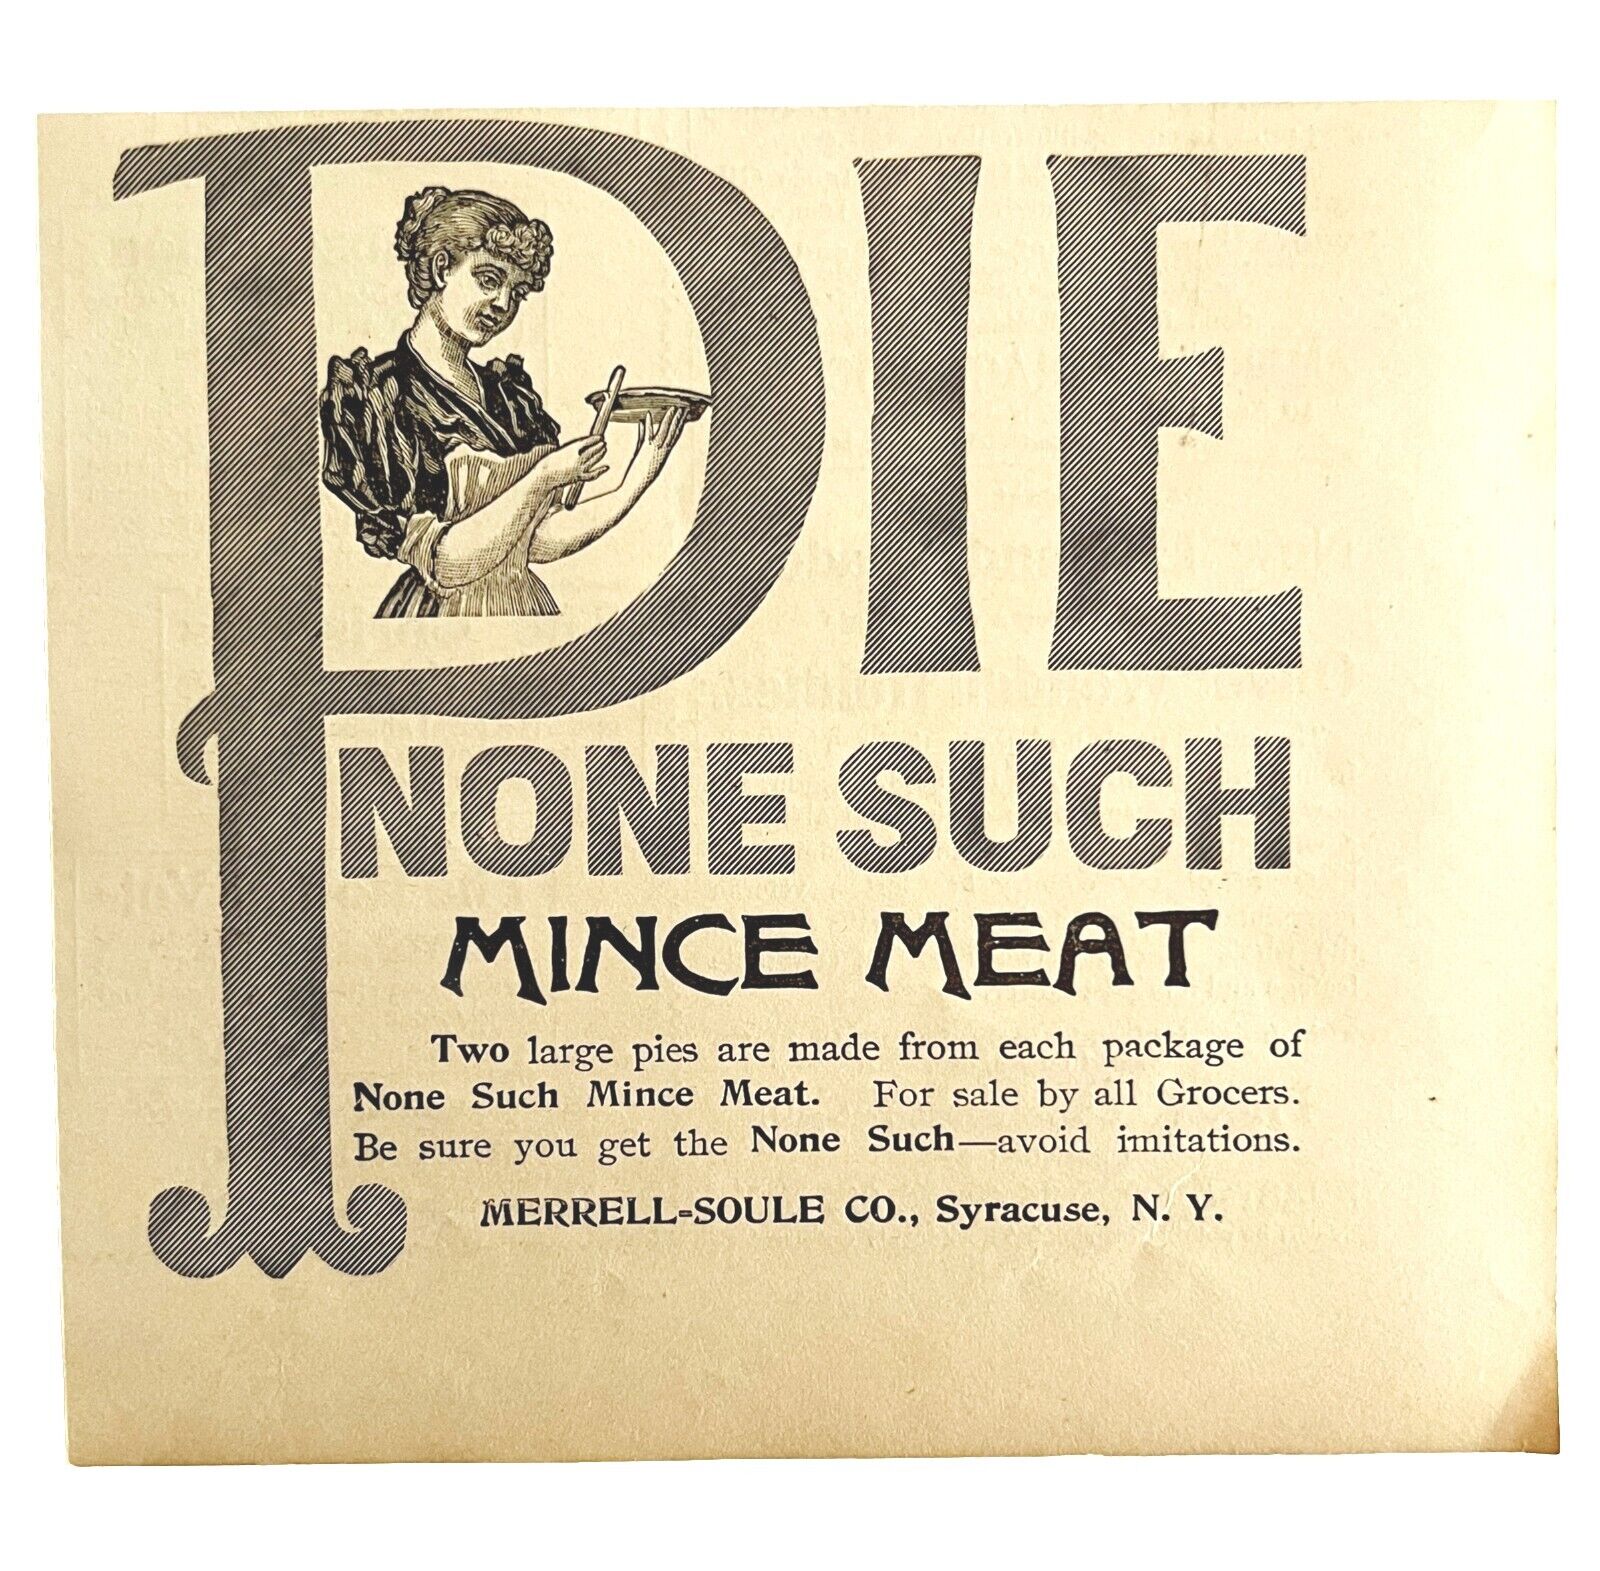 None-Such Mince Meat Pies 1894 Advertisement Victorian Syracuse NY 2 ADBN1oo